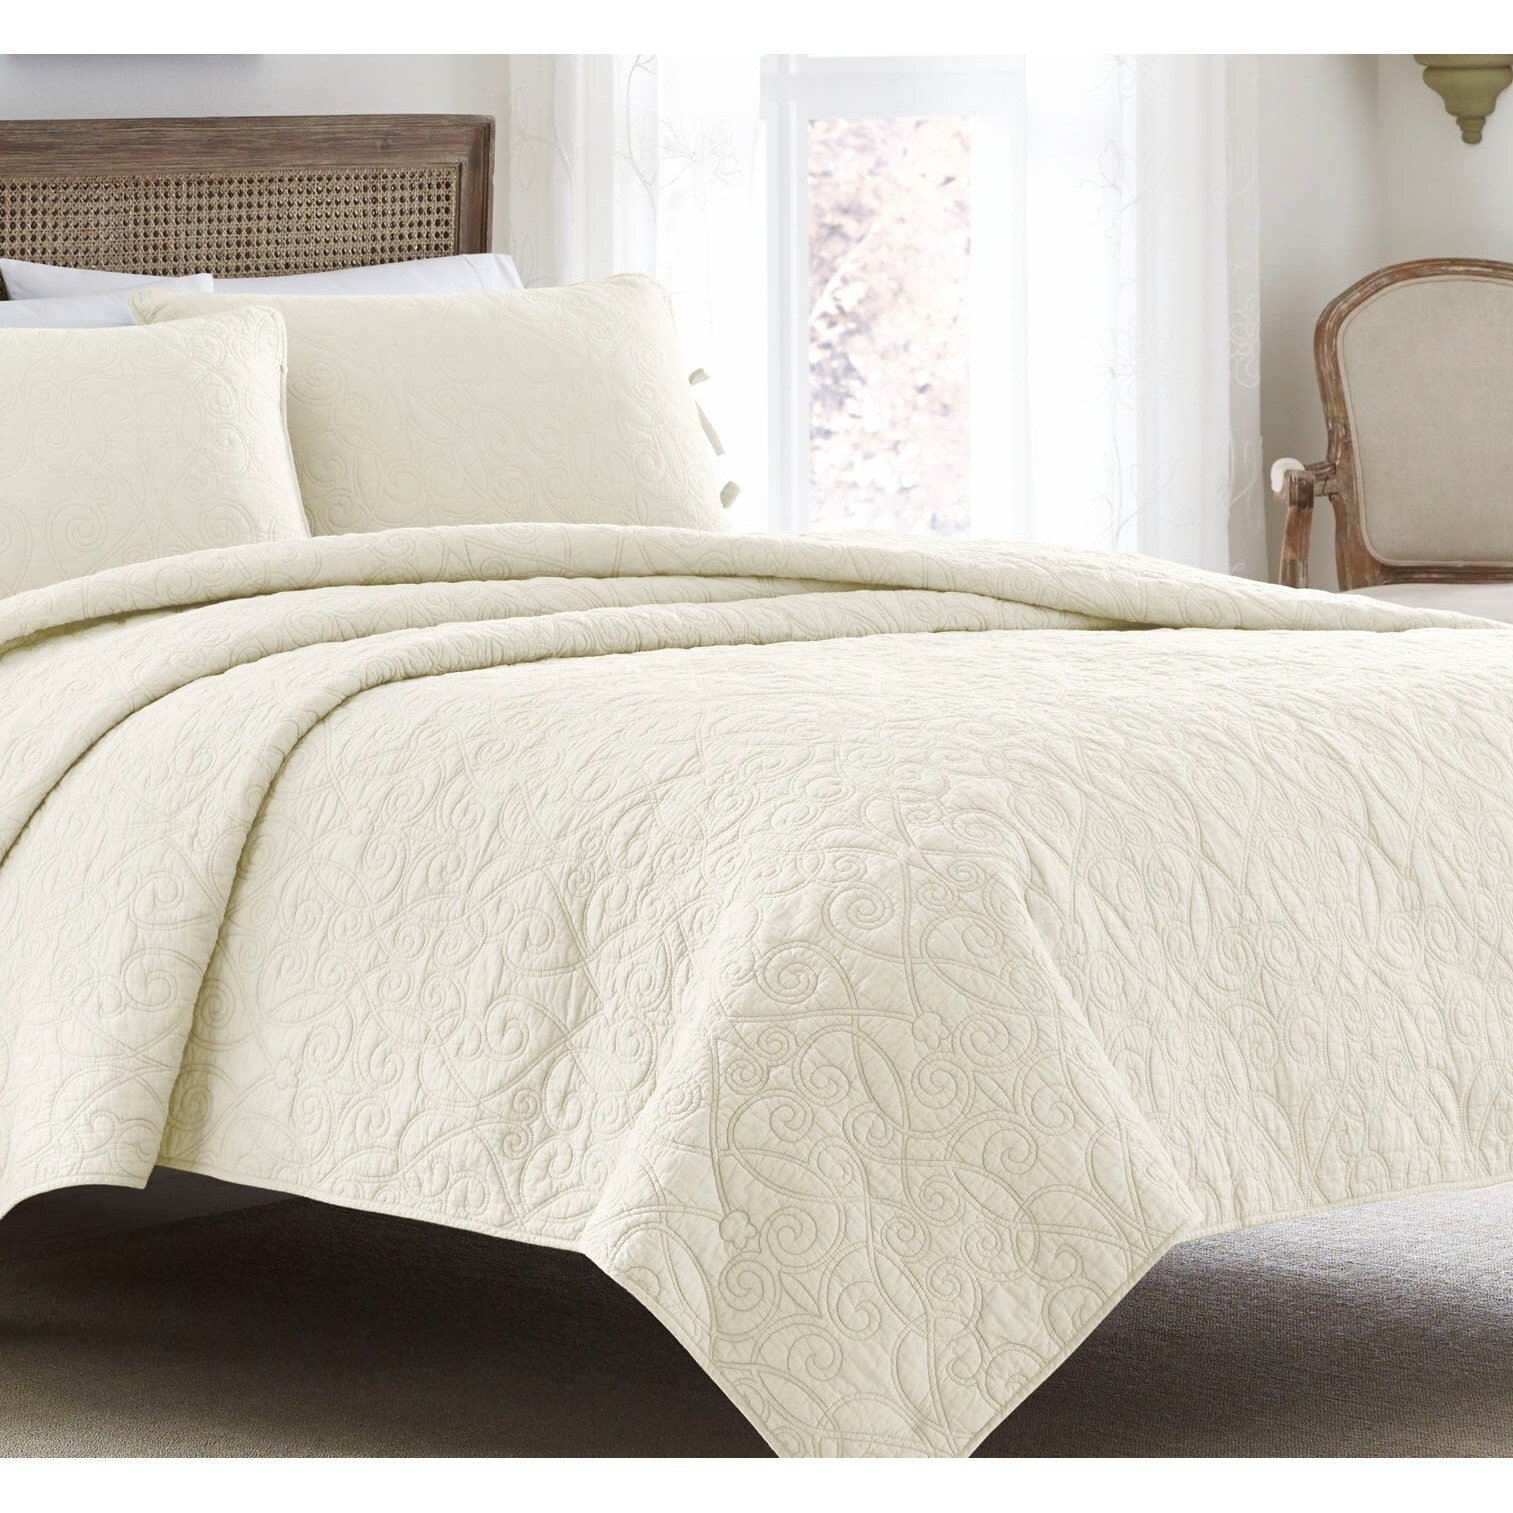 Featured image of post Laura Ashley Ivory Bedroom Furniture : Buy laura ashley home furniture and get the best deals at the lowest prices on ebay!